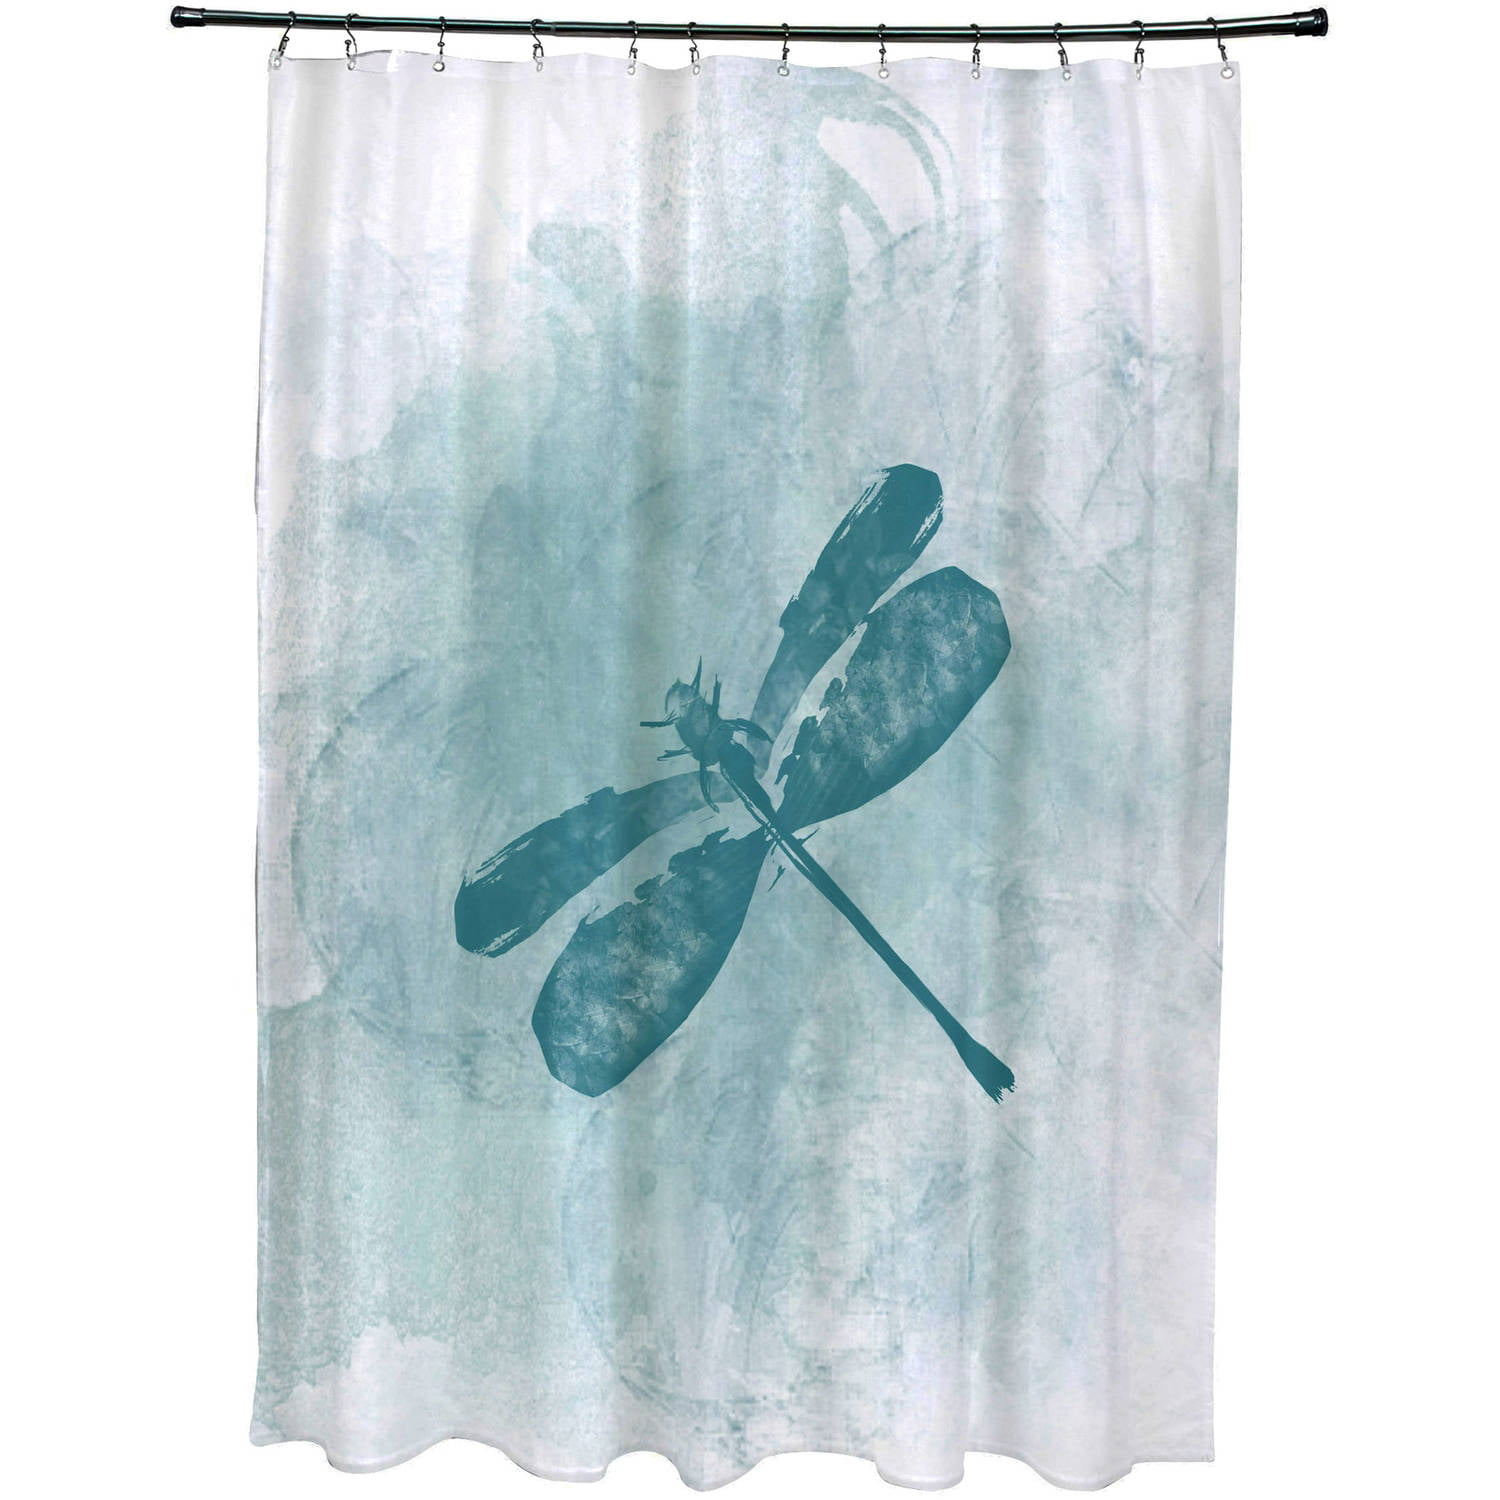 Watercolor Dragonfly On White Bathroom Fabric Shower Curtain With Hooks 71Inches 